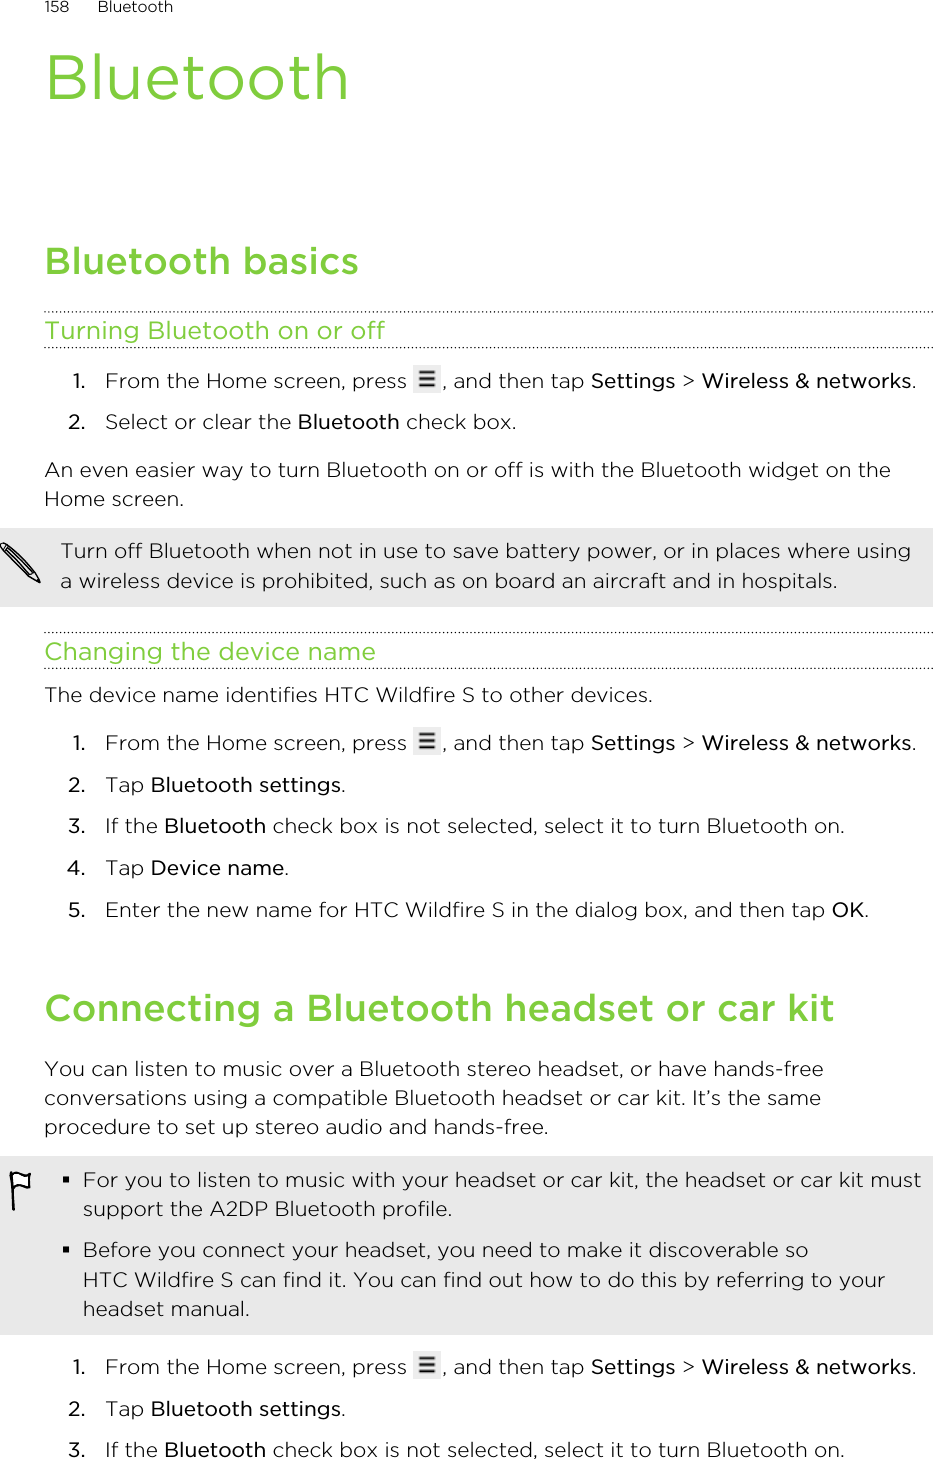 BluetoothBluetooth basicsTurning Bluetooth on or off1. From the Home screen, press  , and then tap Settings &gt; Wireless &amp; networks.2. Select or clear the Bluetooth check box.An even easier way to turn Bluetooth on or off is with the Bluetooth widget on theHome screen.Turn off Bluetooth when not in use to save battery power, or in places where usinga wireless device is prohibited, such as on board an aircraft and in hospitals.Changing the device nameThe device name identifies HTC Wildfire S to other devices.1. From the Home screen, press  , and then tap Settings &gt; Wireless &amp; networks.2. Tap Bluetooth settings.3. If the Bluetooth check box is not selected, select it to turn Bluetooth on.4. Tap Device name.5. Enter the new name for HTC Wildfire S in the dialog box, and then tap OK.Connecting a Bluetooth headset or car kitYou can listen to music over a Bluetooth stereo headset, or have hands-freeconversations using a compatible Bluetooth headset or car kit. It’s the sameprocedure to set up stereo audio and hands-free.§For you to listen to music with your headset or car kit, the headset or car kit mustsupport the A2DP Bluetooth profile.§Before you connect your headset, you need to make it discoverable soHTC Wildfire S can find it. You can find out how to do this by referring to yourheadset manual.1. From the Home screen, press  , and then tap Settings &gt; Wireless &amp; networks.2. Tap Bluetooth settings.3. If the Bluetooth check box is not selected, select it to turn Bluetooth on.158 Bluetooth